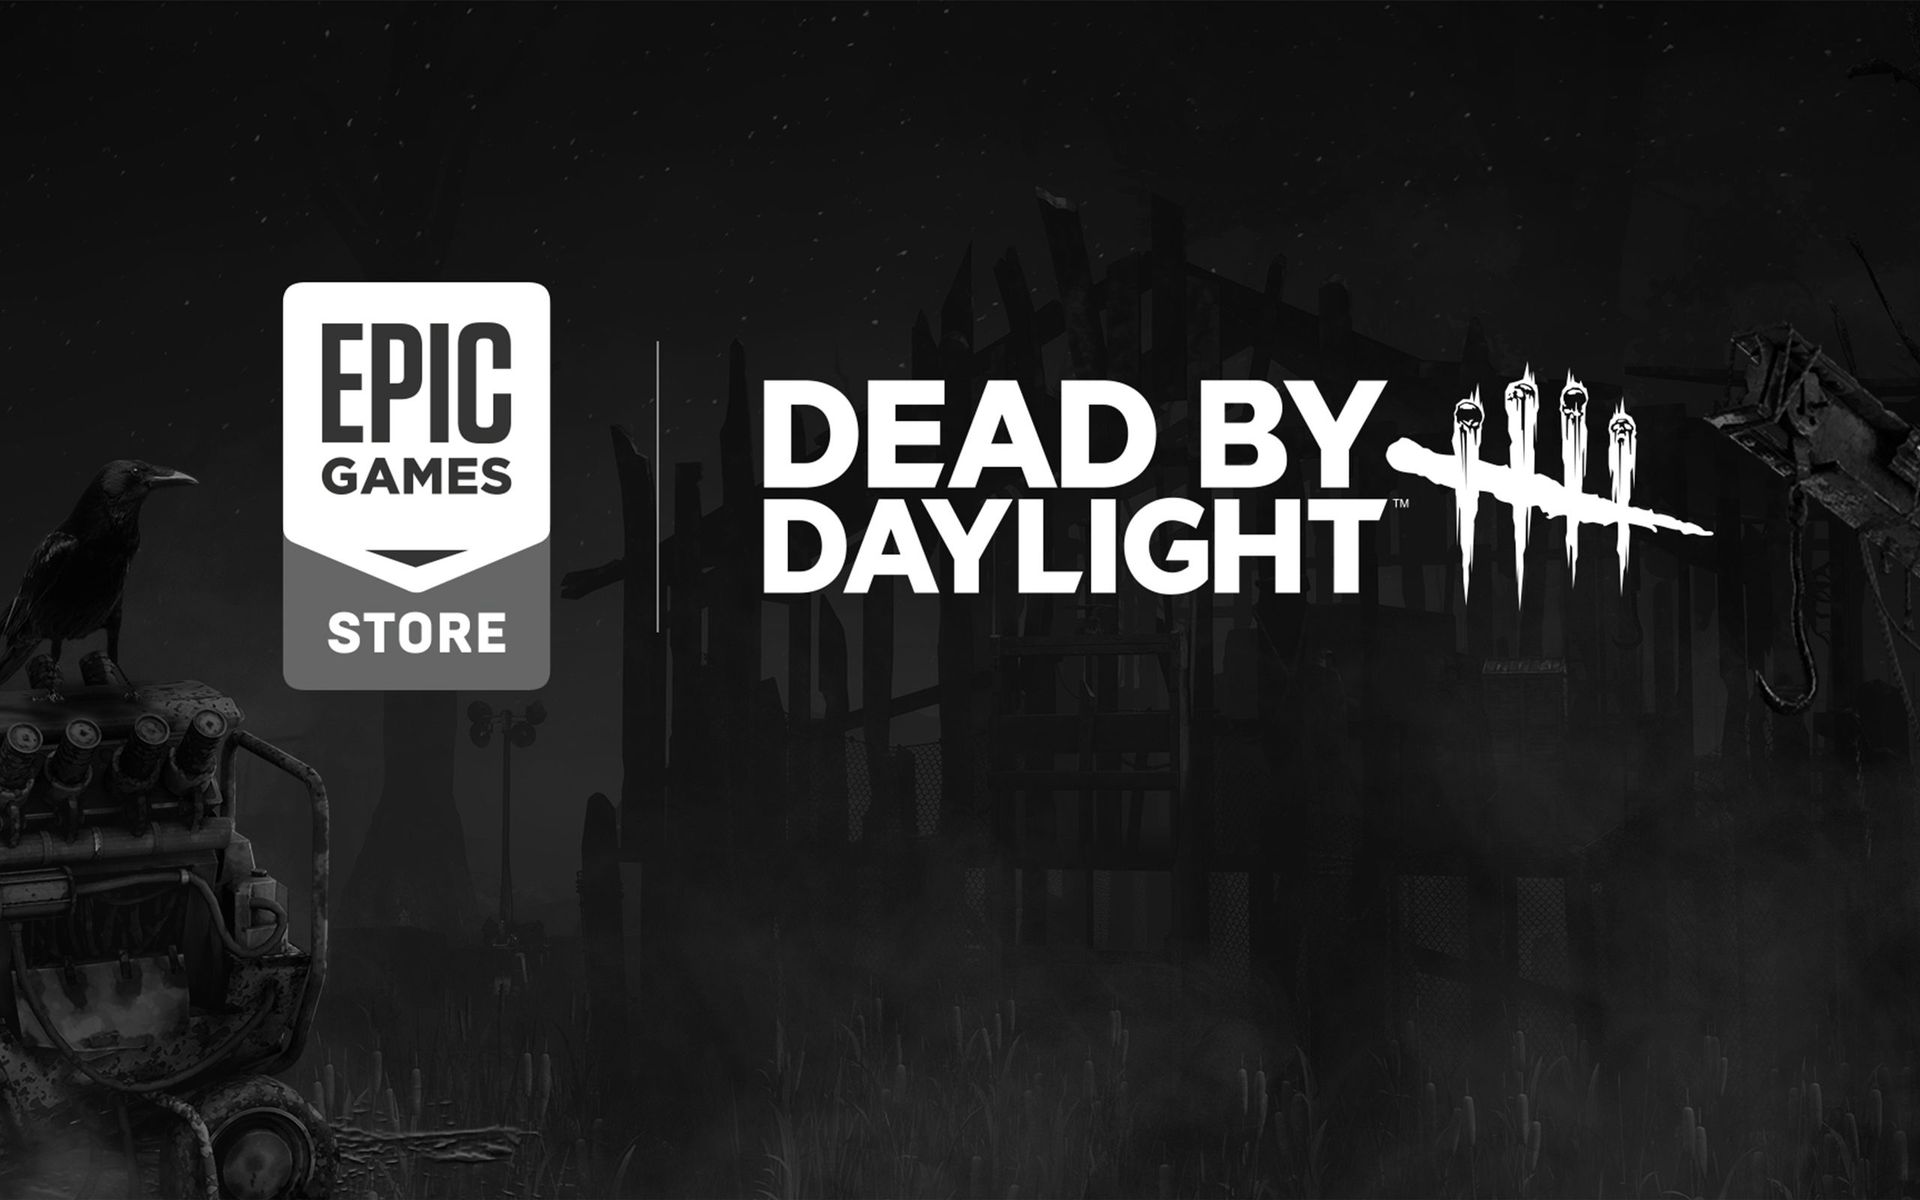 Deads store. Epic games stor. Death by Daylight Epic games. Сколько стоит Dead by Daylight в Epic games.